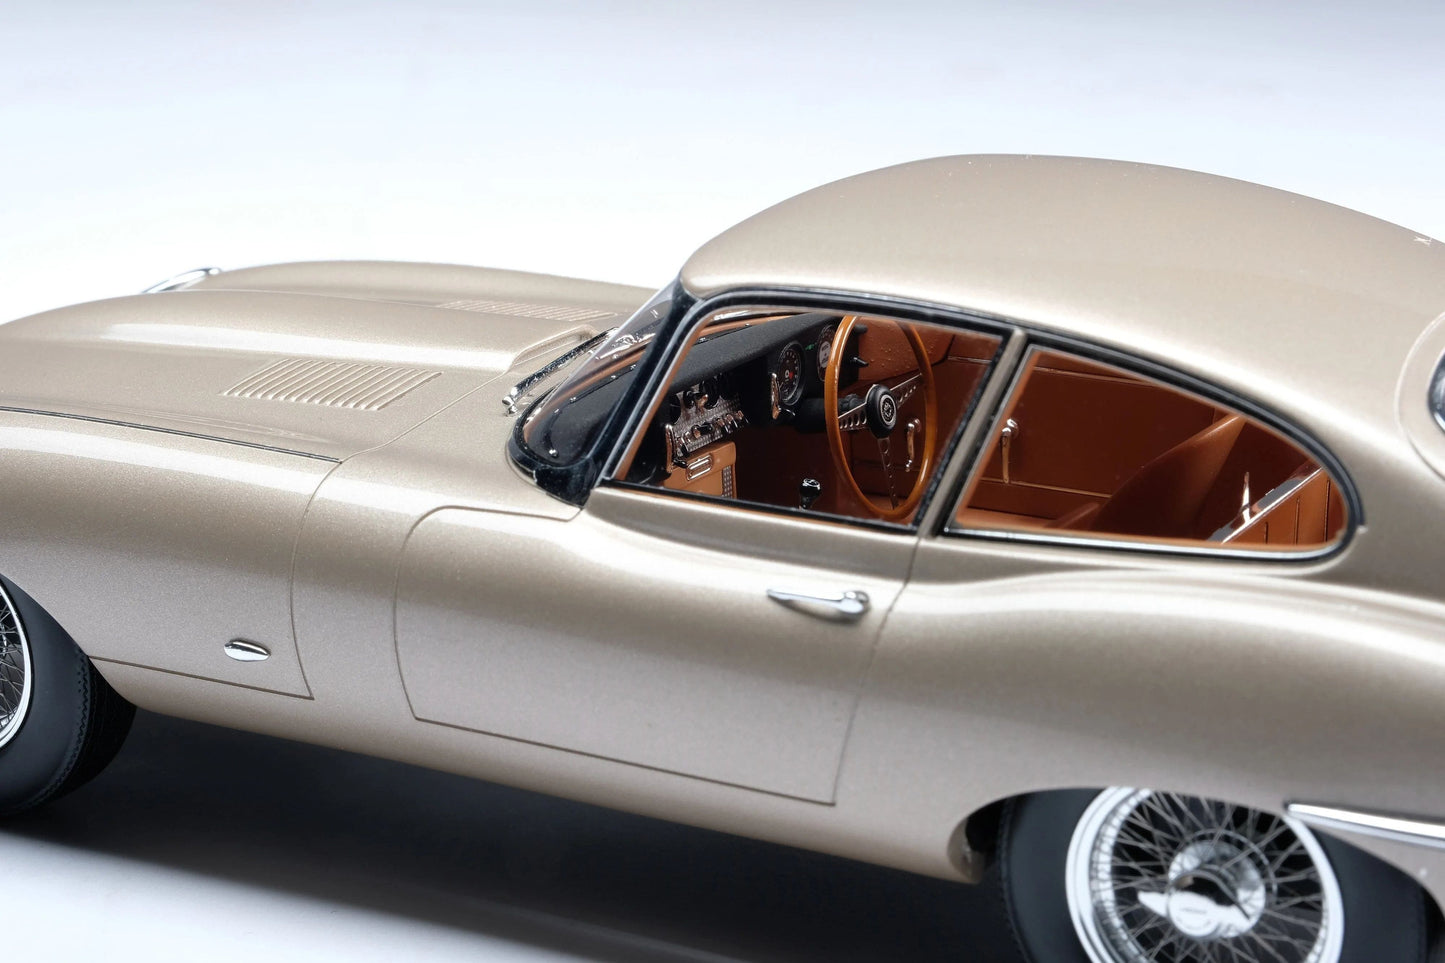 Jaguar E-type Coupe by  Amalgam Collection |  Time Keeper.